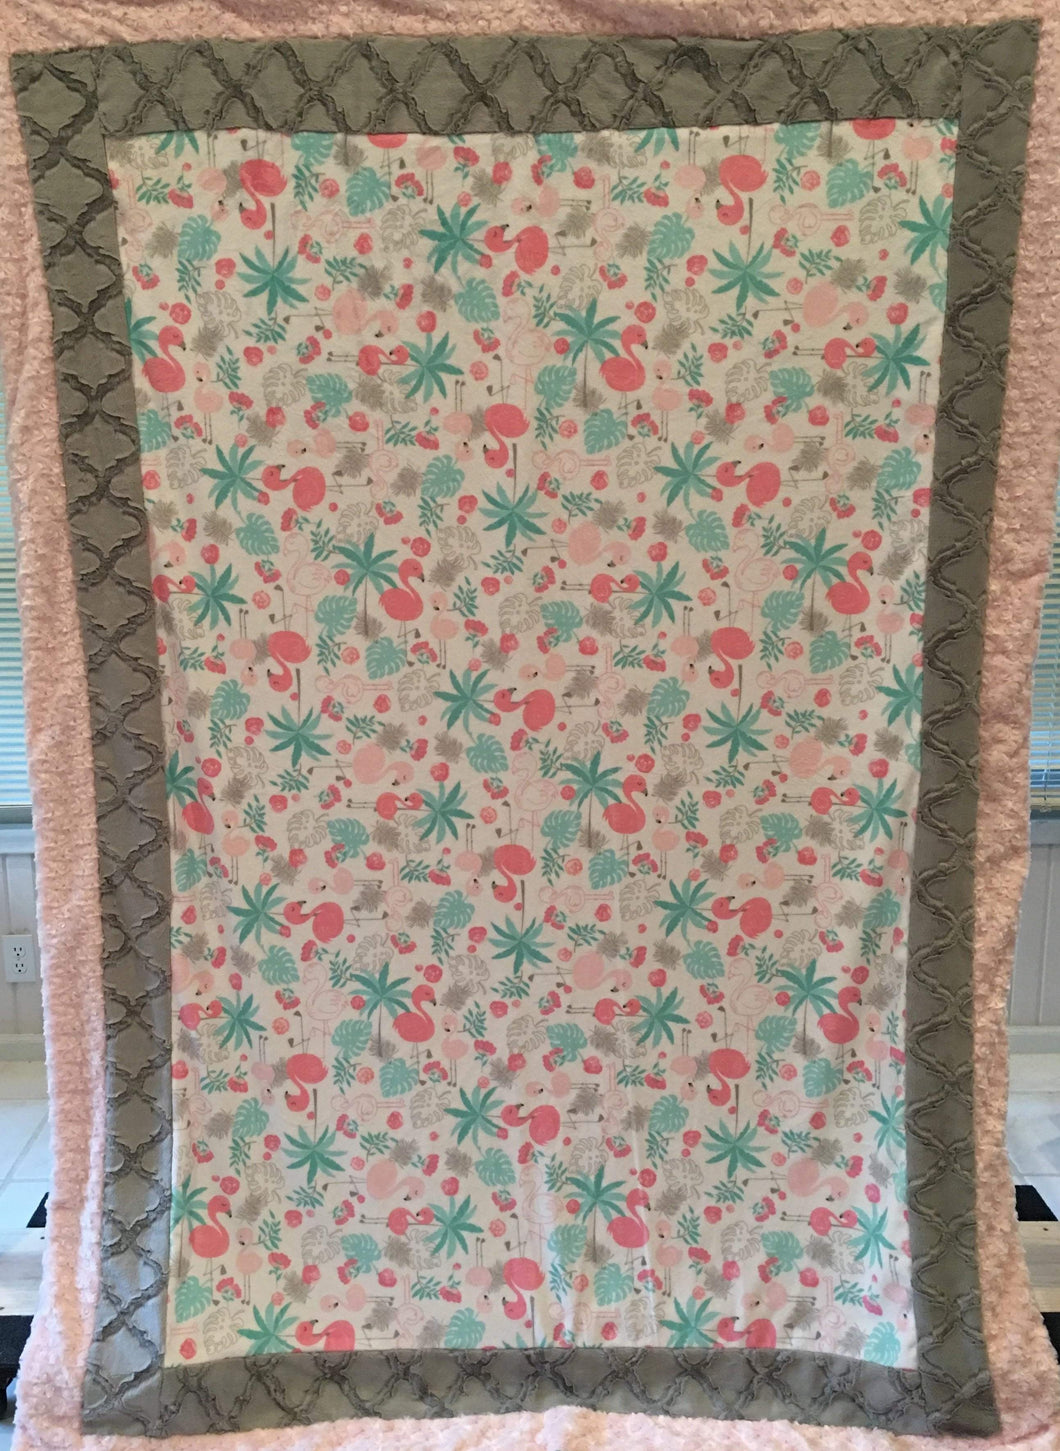 Bordered Style Blanket: Cuddle Flamingo Bordered Luxe on Luxe Cuddle Sea Glass Hide